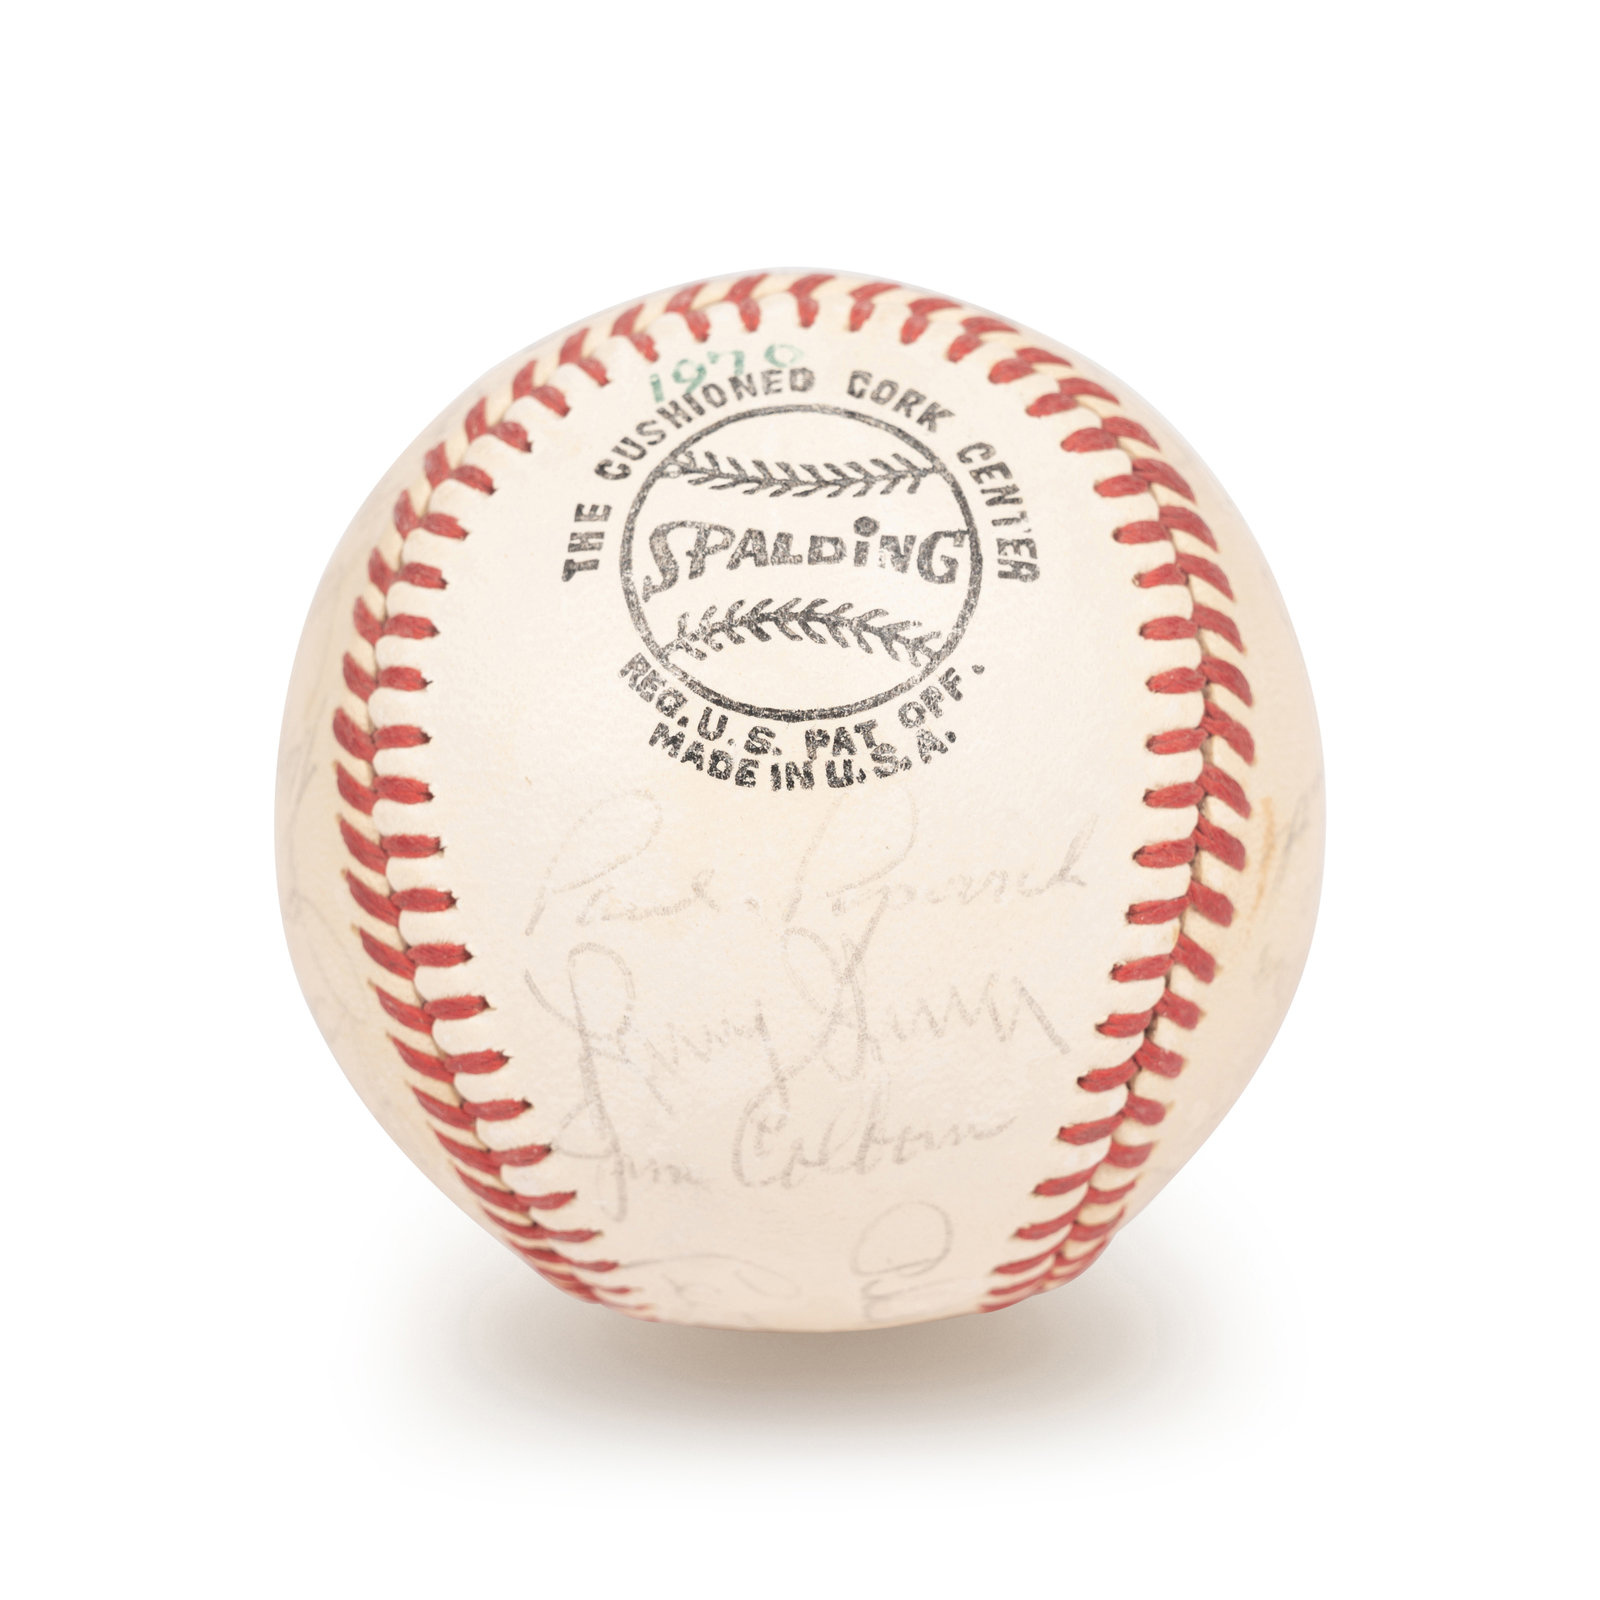 Sold at Auction: Autographed Fergie Jenkins Official League Baseball.